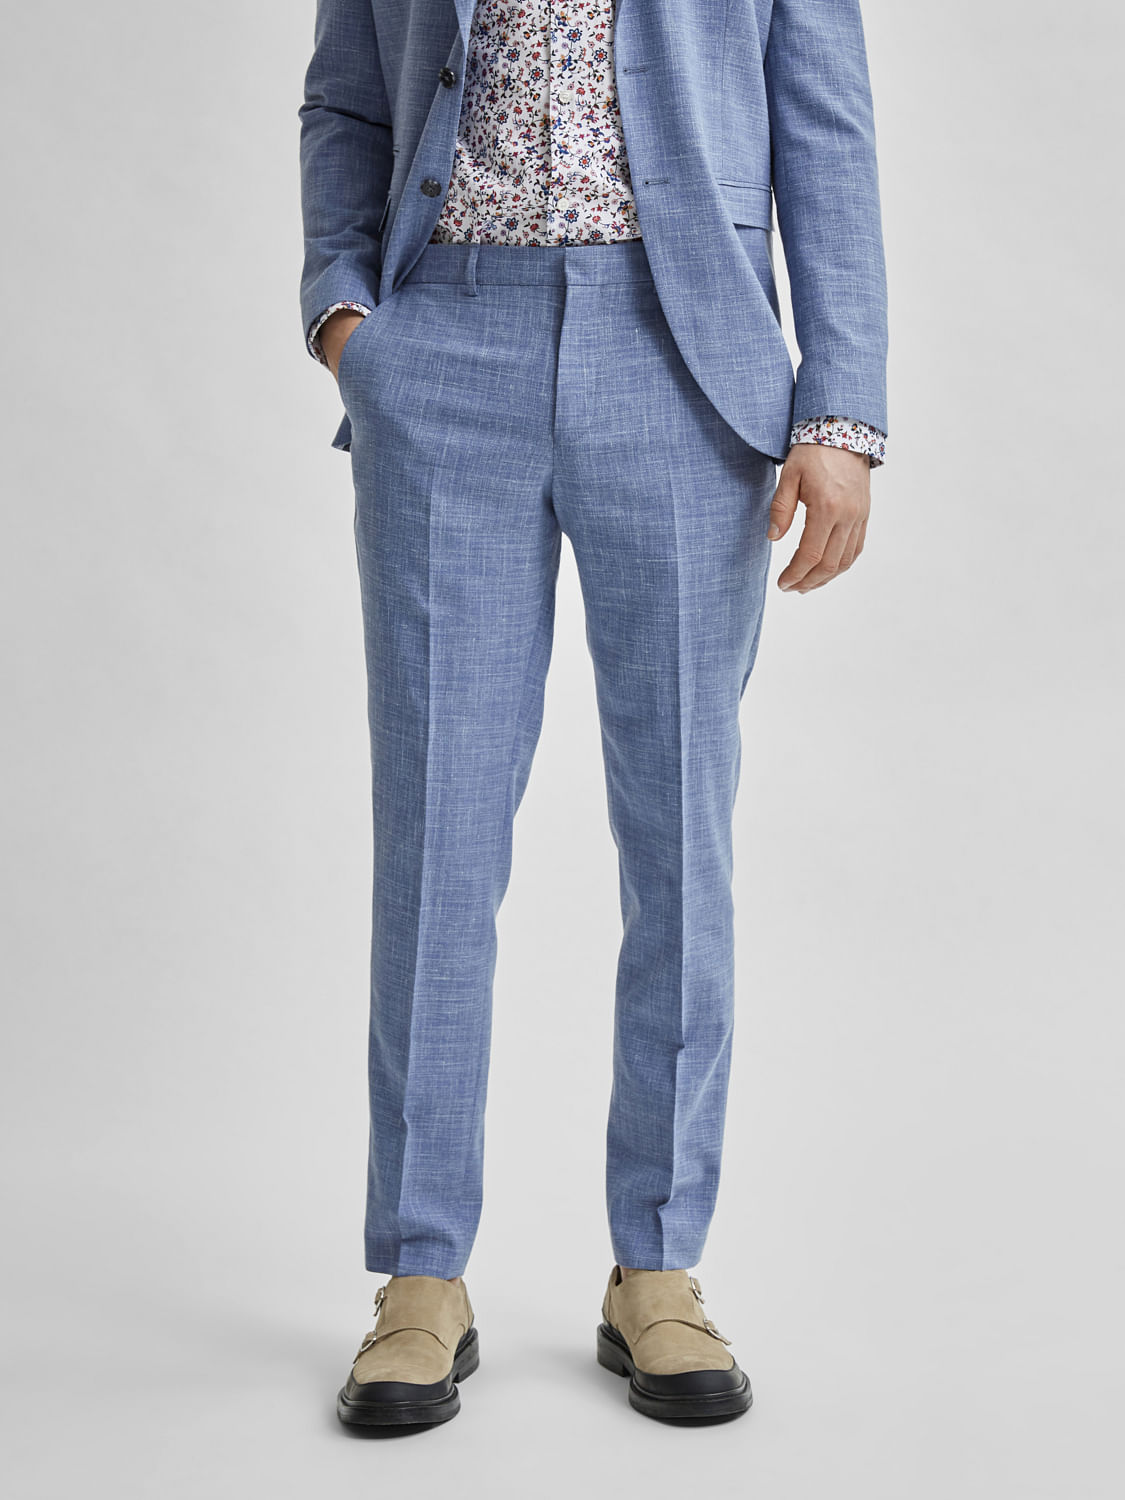 Ted Baker | Dusty Blue Tonal Check Slim Trousers |The Shirt Store